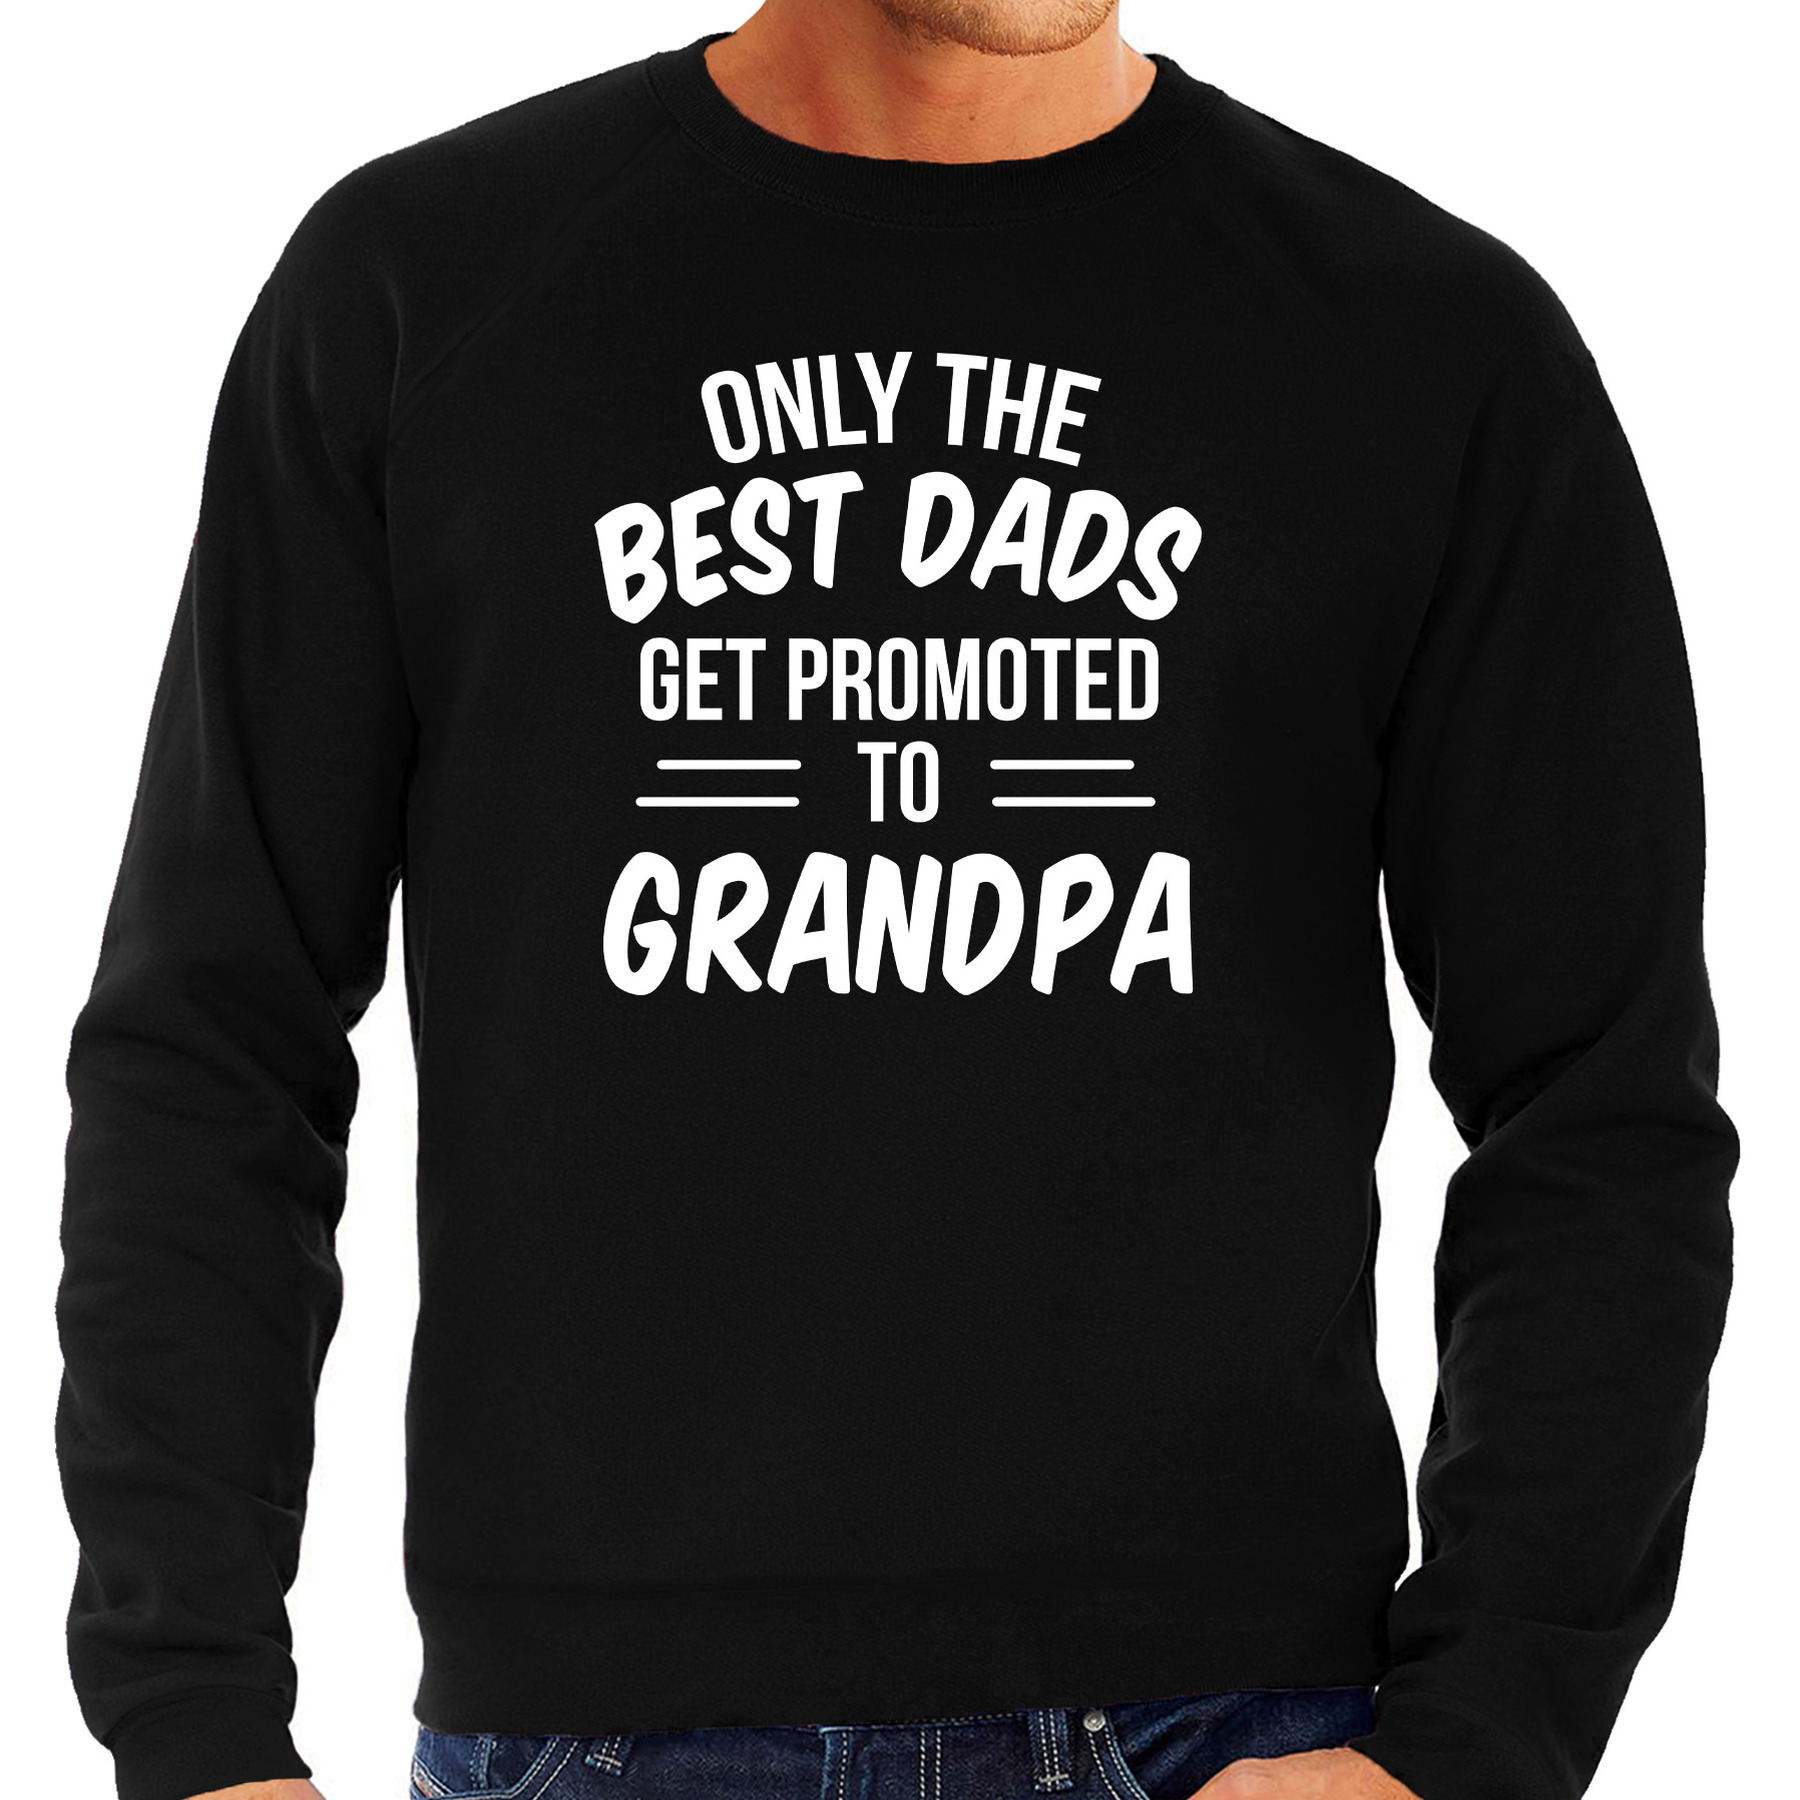 Only the best dads get promoted to grandpa sweater zwart voor heren papa vaderdag cadeau trui